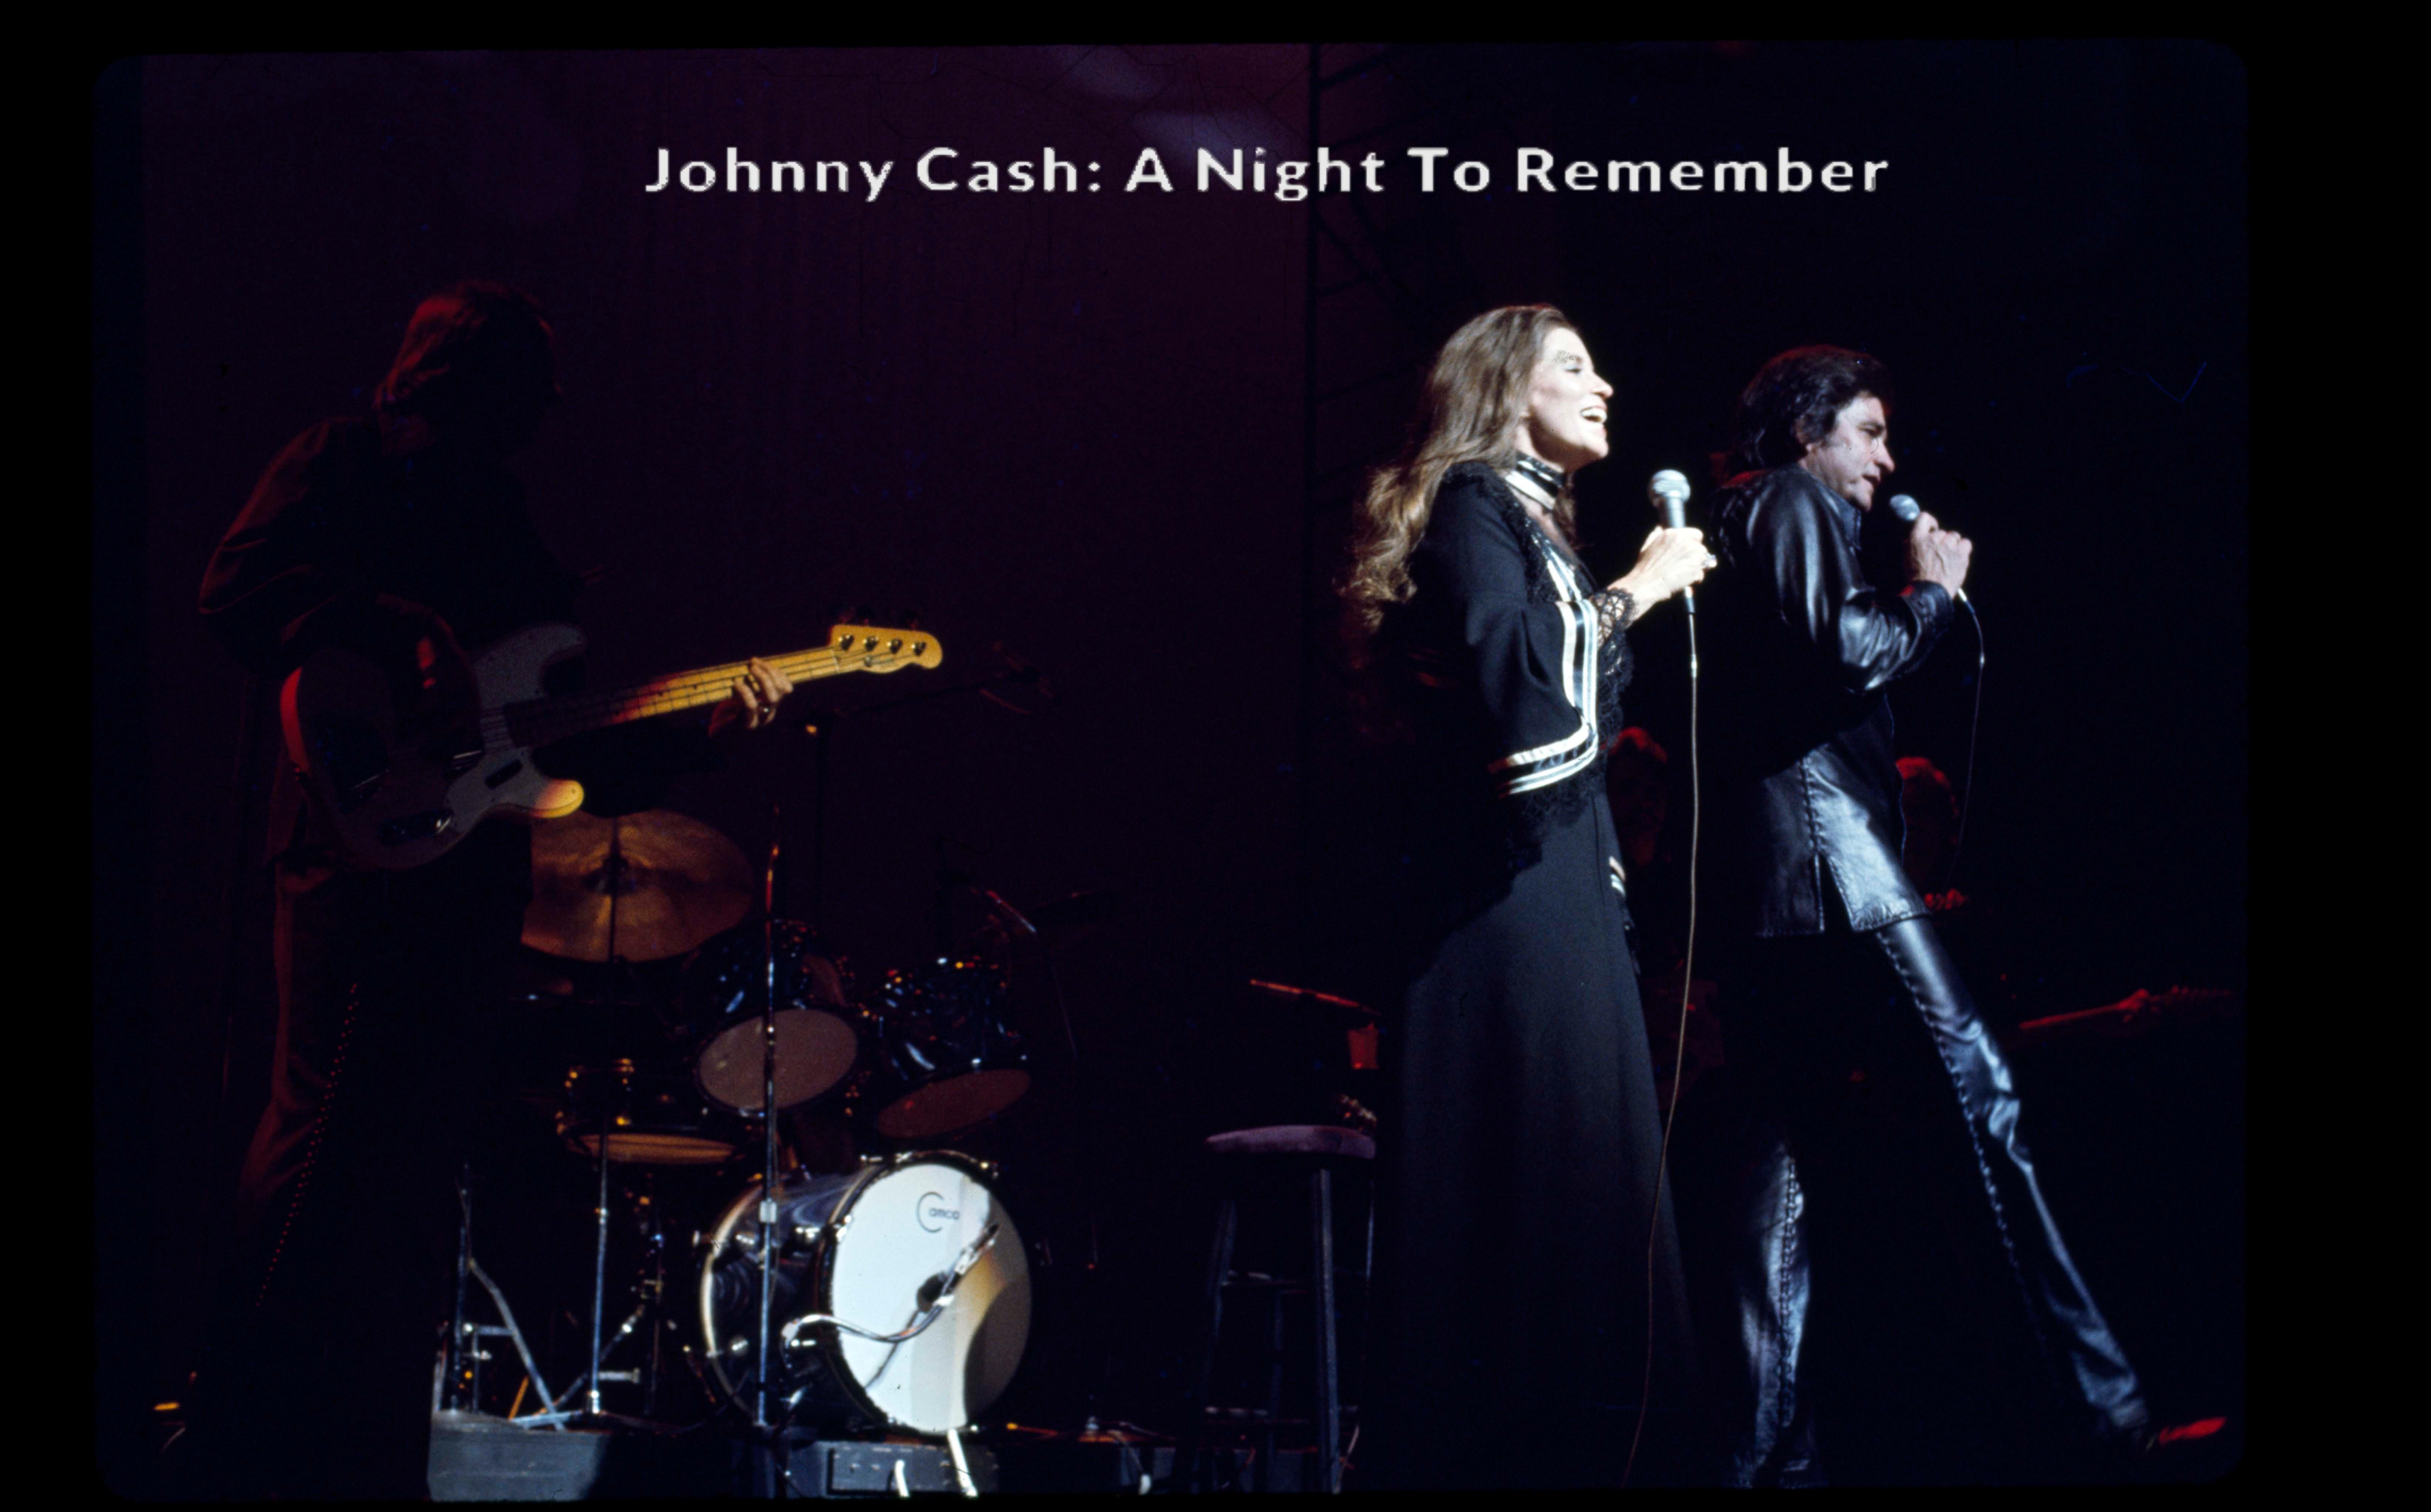 Johnny Cash: A Night to Remember